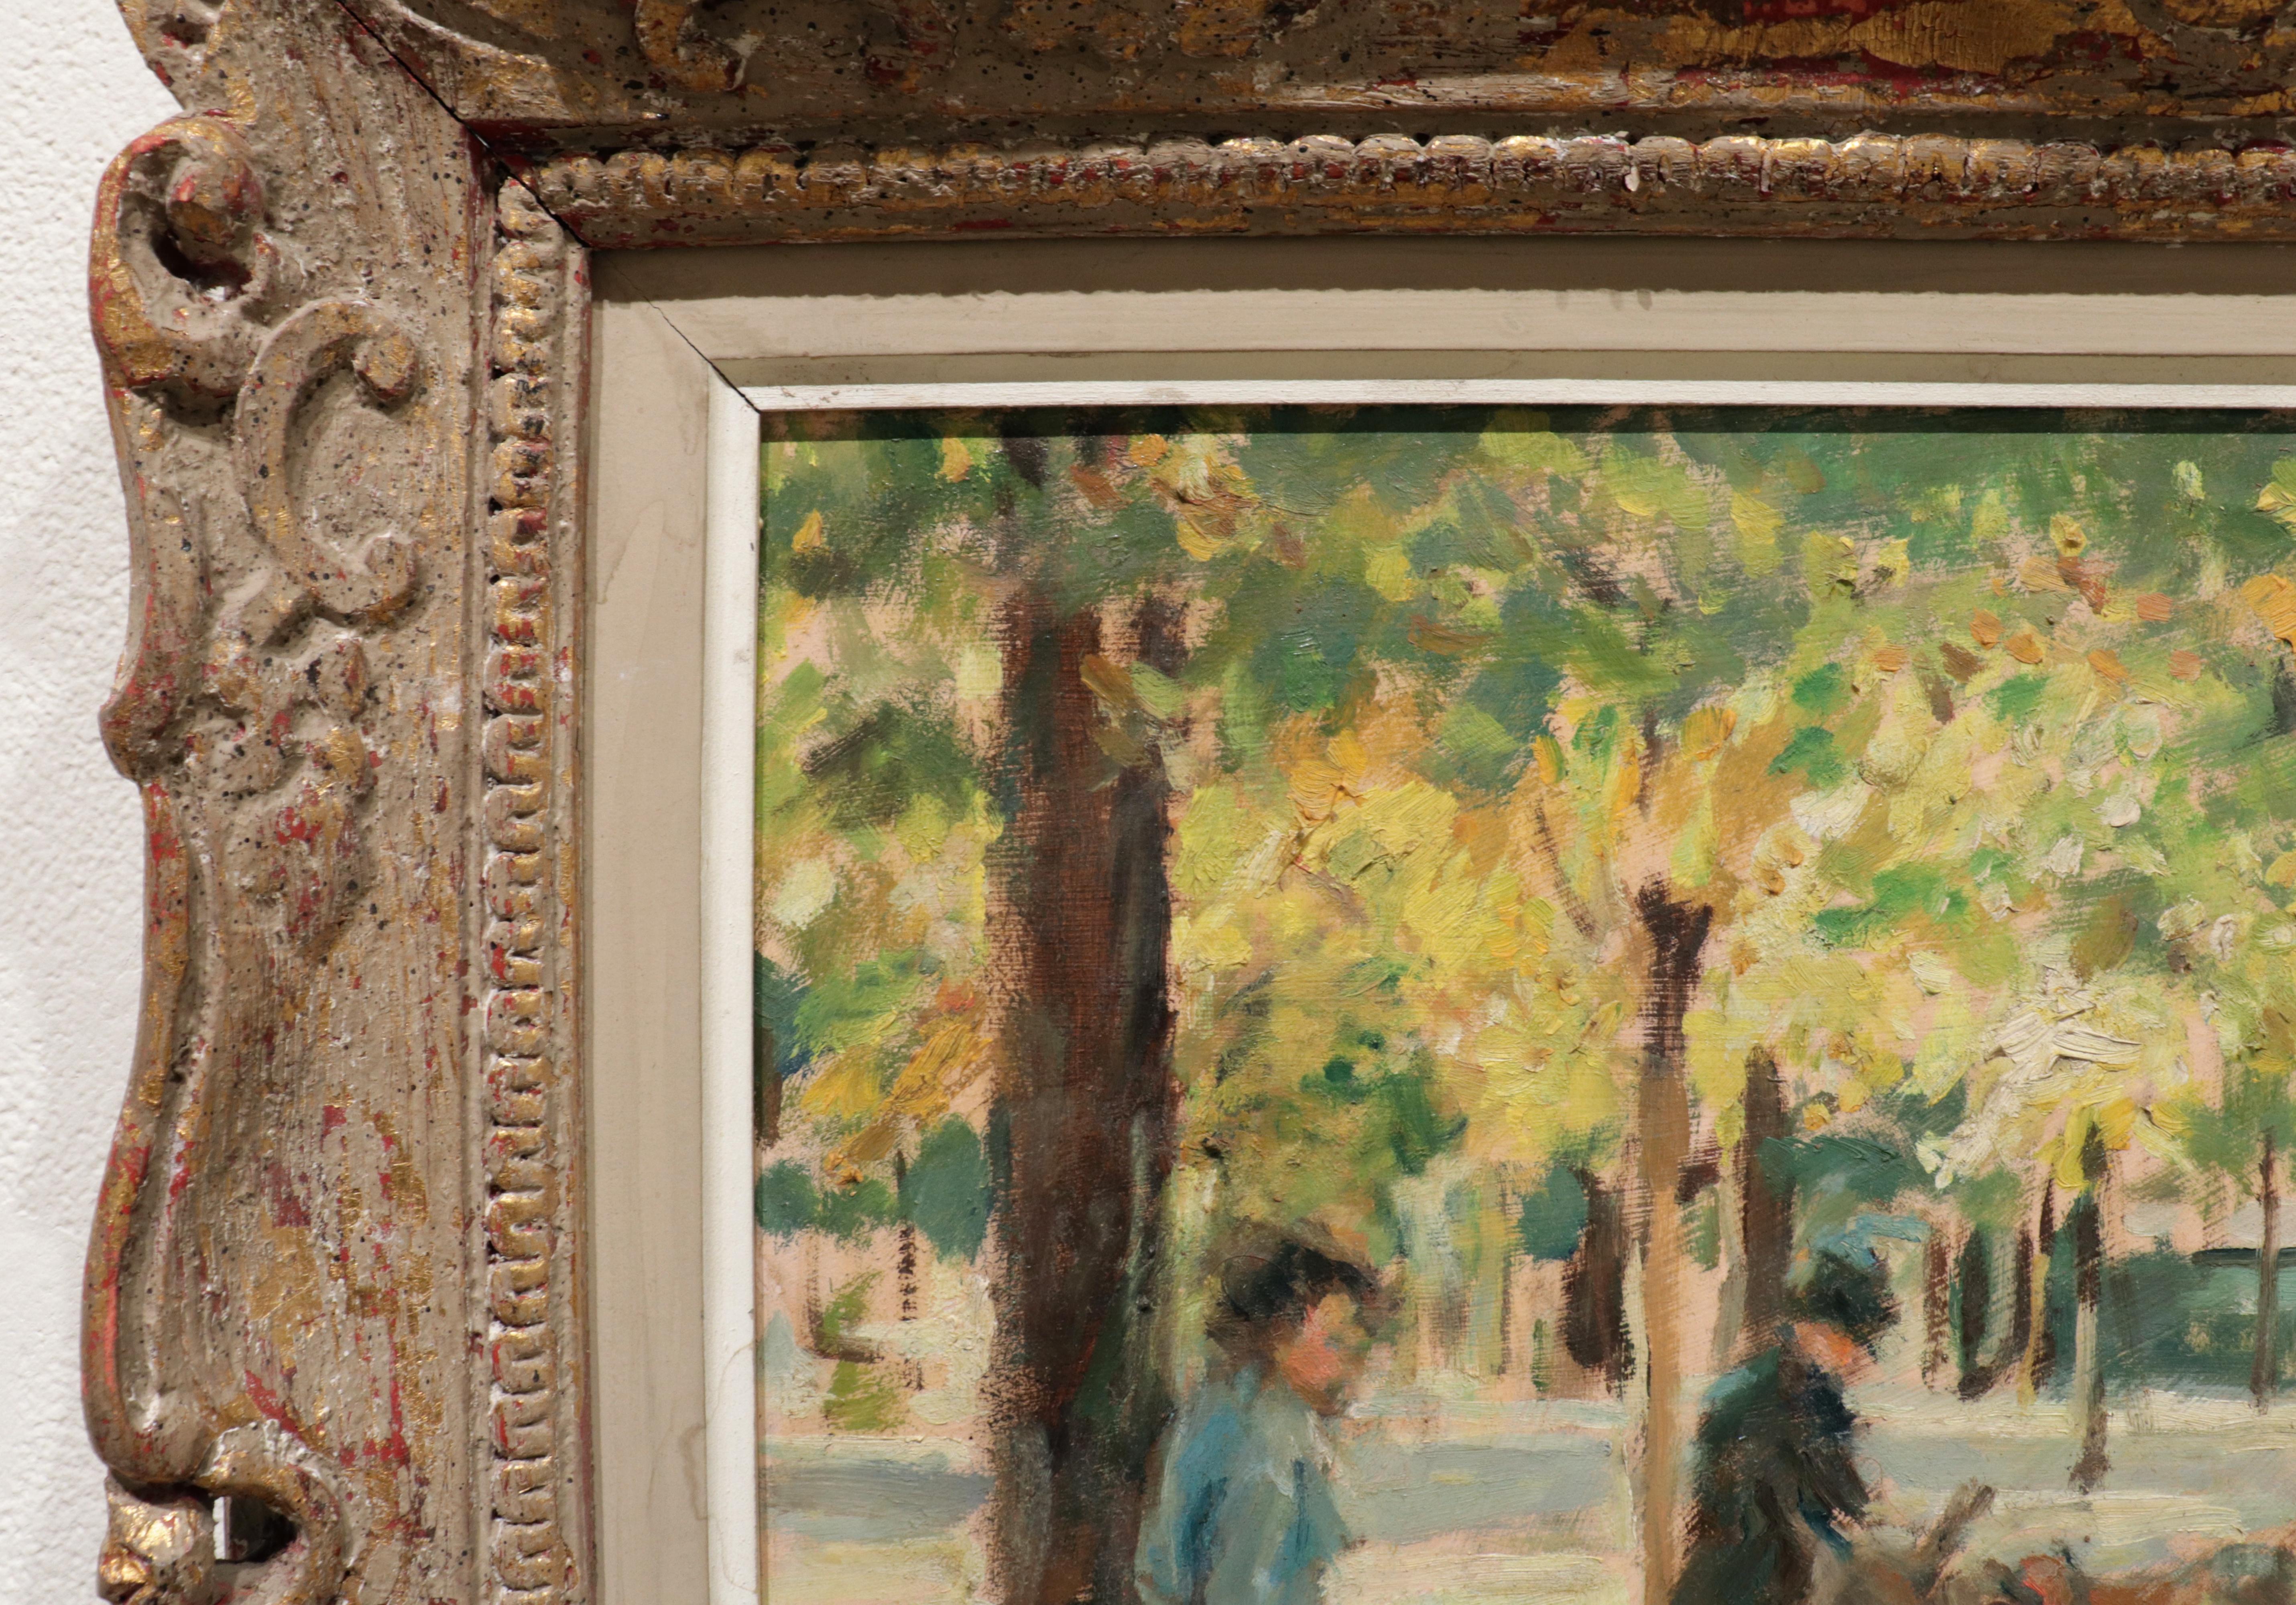 PARK SCENE by Marie Stobbe, American Impressionist, Central Park, NYC 1